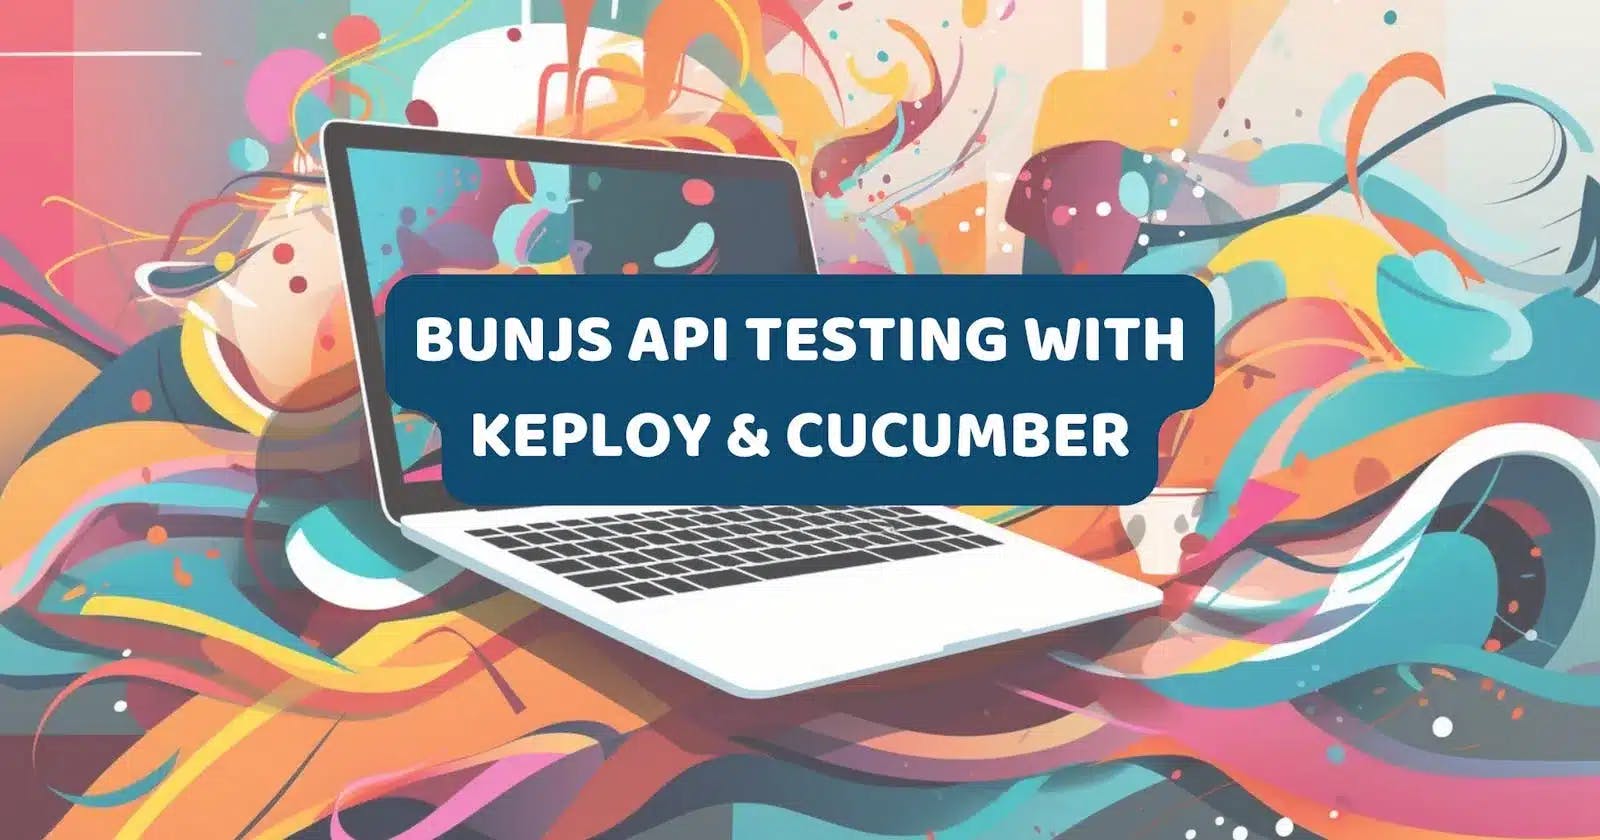 Cover Image for Testing BunJs Web Application with Cucumber JS and Keploy